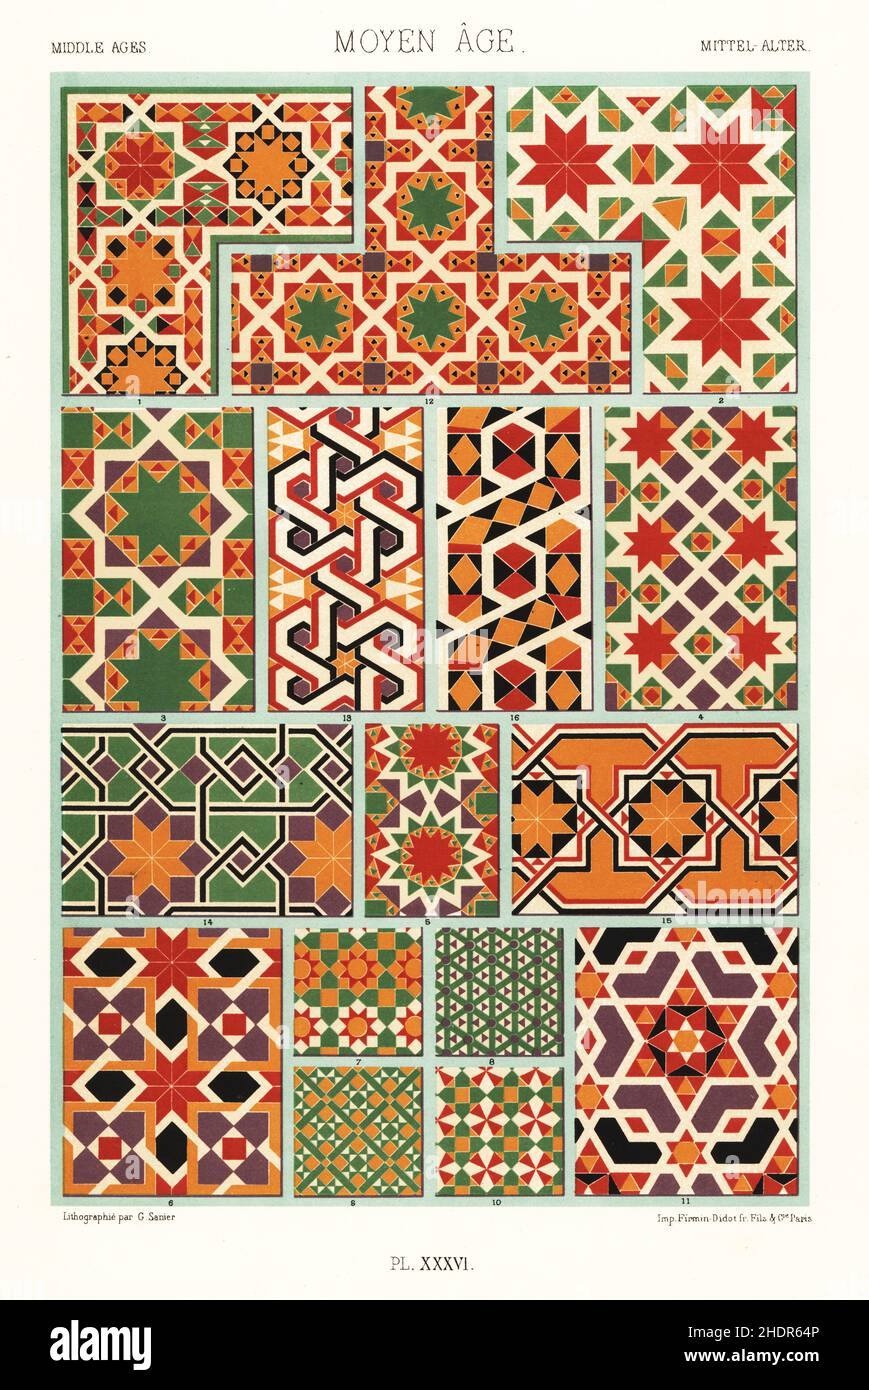 Middle Ages, mosaic decorations, 12th century. Mosaic work patterns from Palatine Chapel, Palermo 1-12, Ziza Palace 13-15, and Salerno Cathedral 16. Moyen Age. Hand-finished chromolithograph by G. Sanier from Albert-Charles-Auguste Racinet’s L’Ornement Polychrome, (Polychromatic Ornament), Firmin-Didot, Paris, 1869-73. Stock Photo